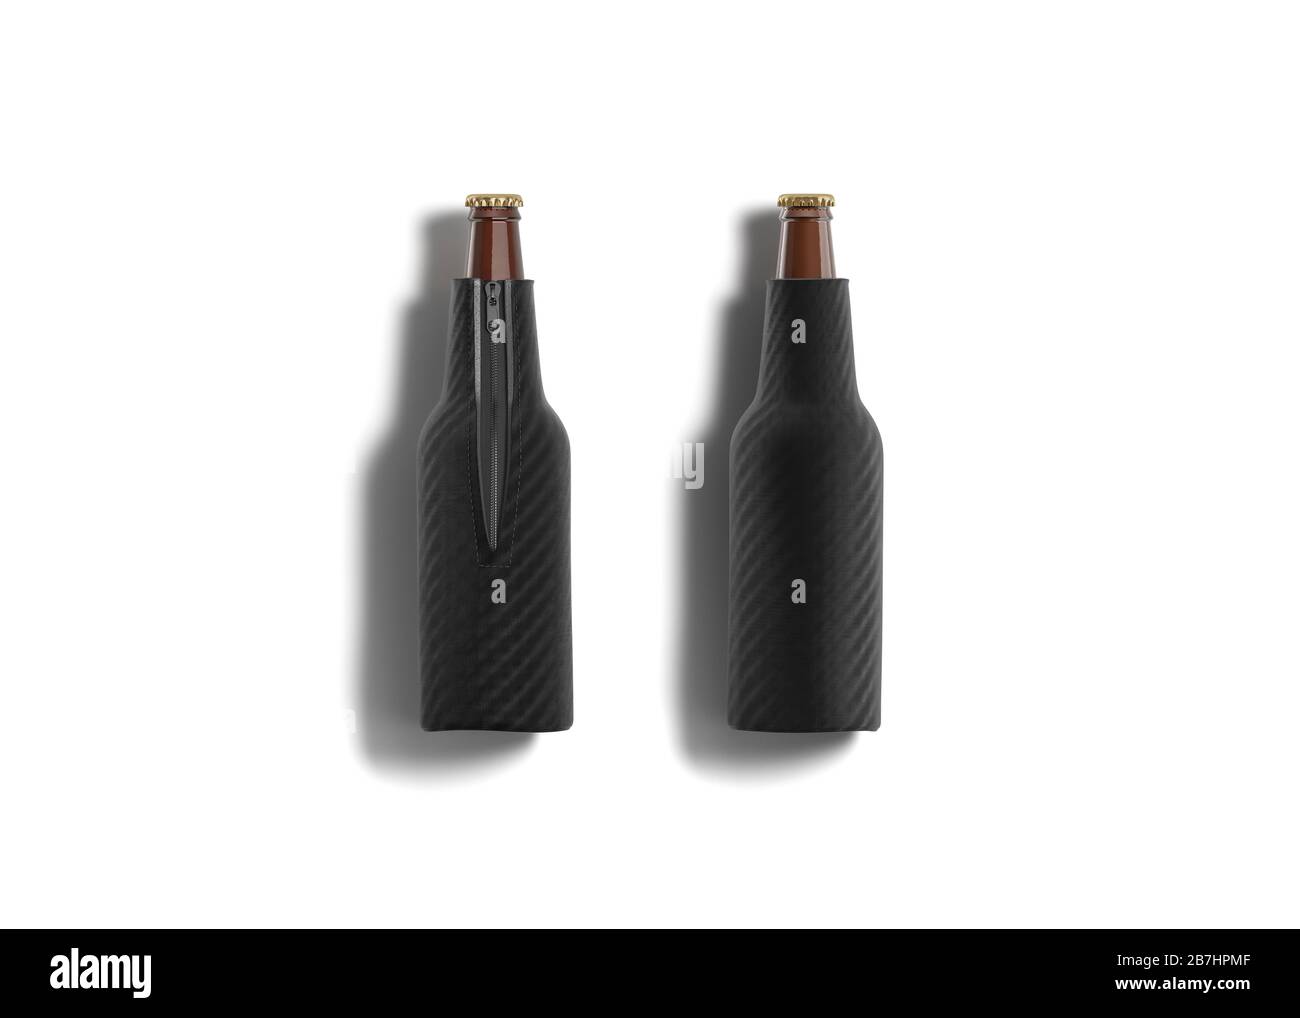 Blank black collapsible beer bottle koozie mockup, front and back Stock Photo